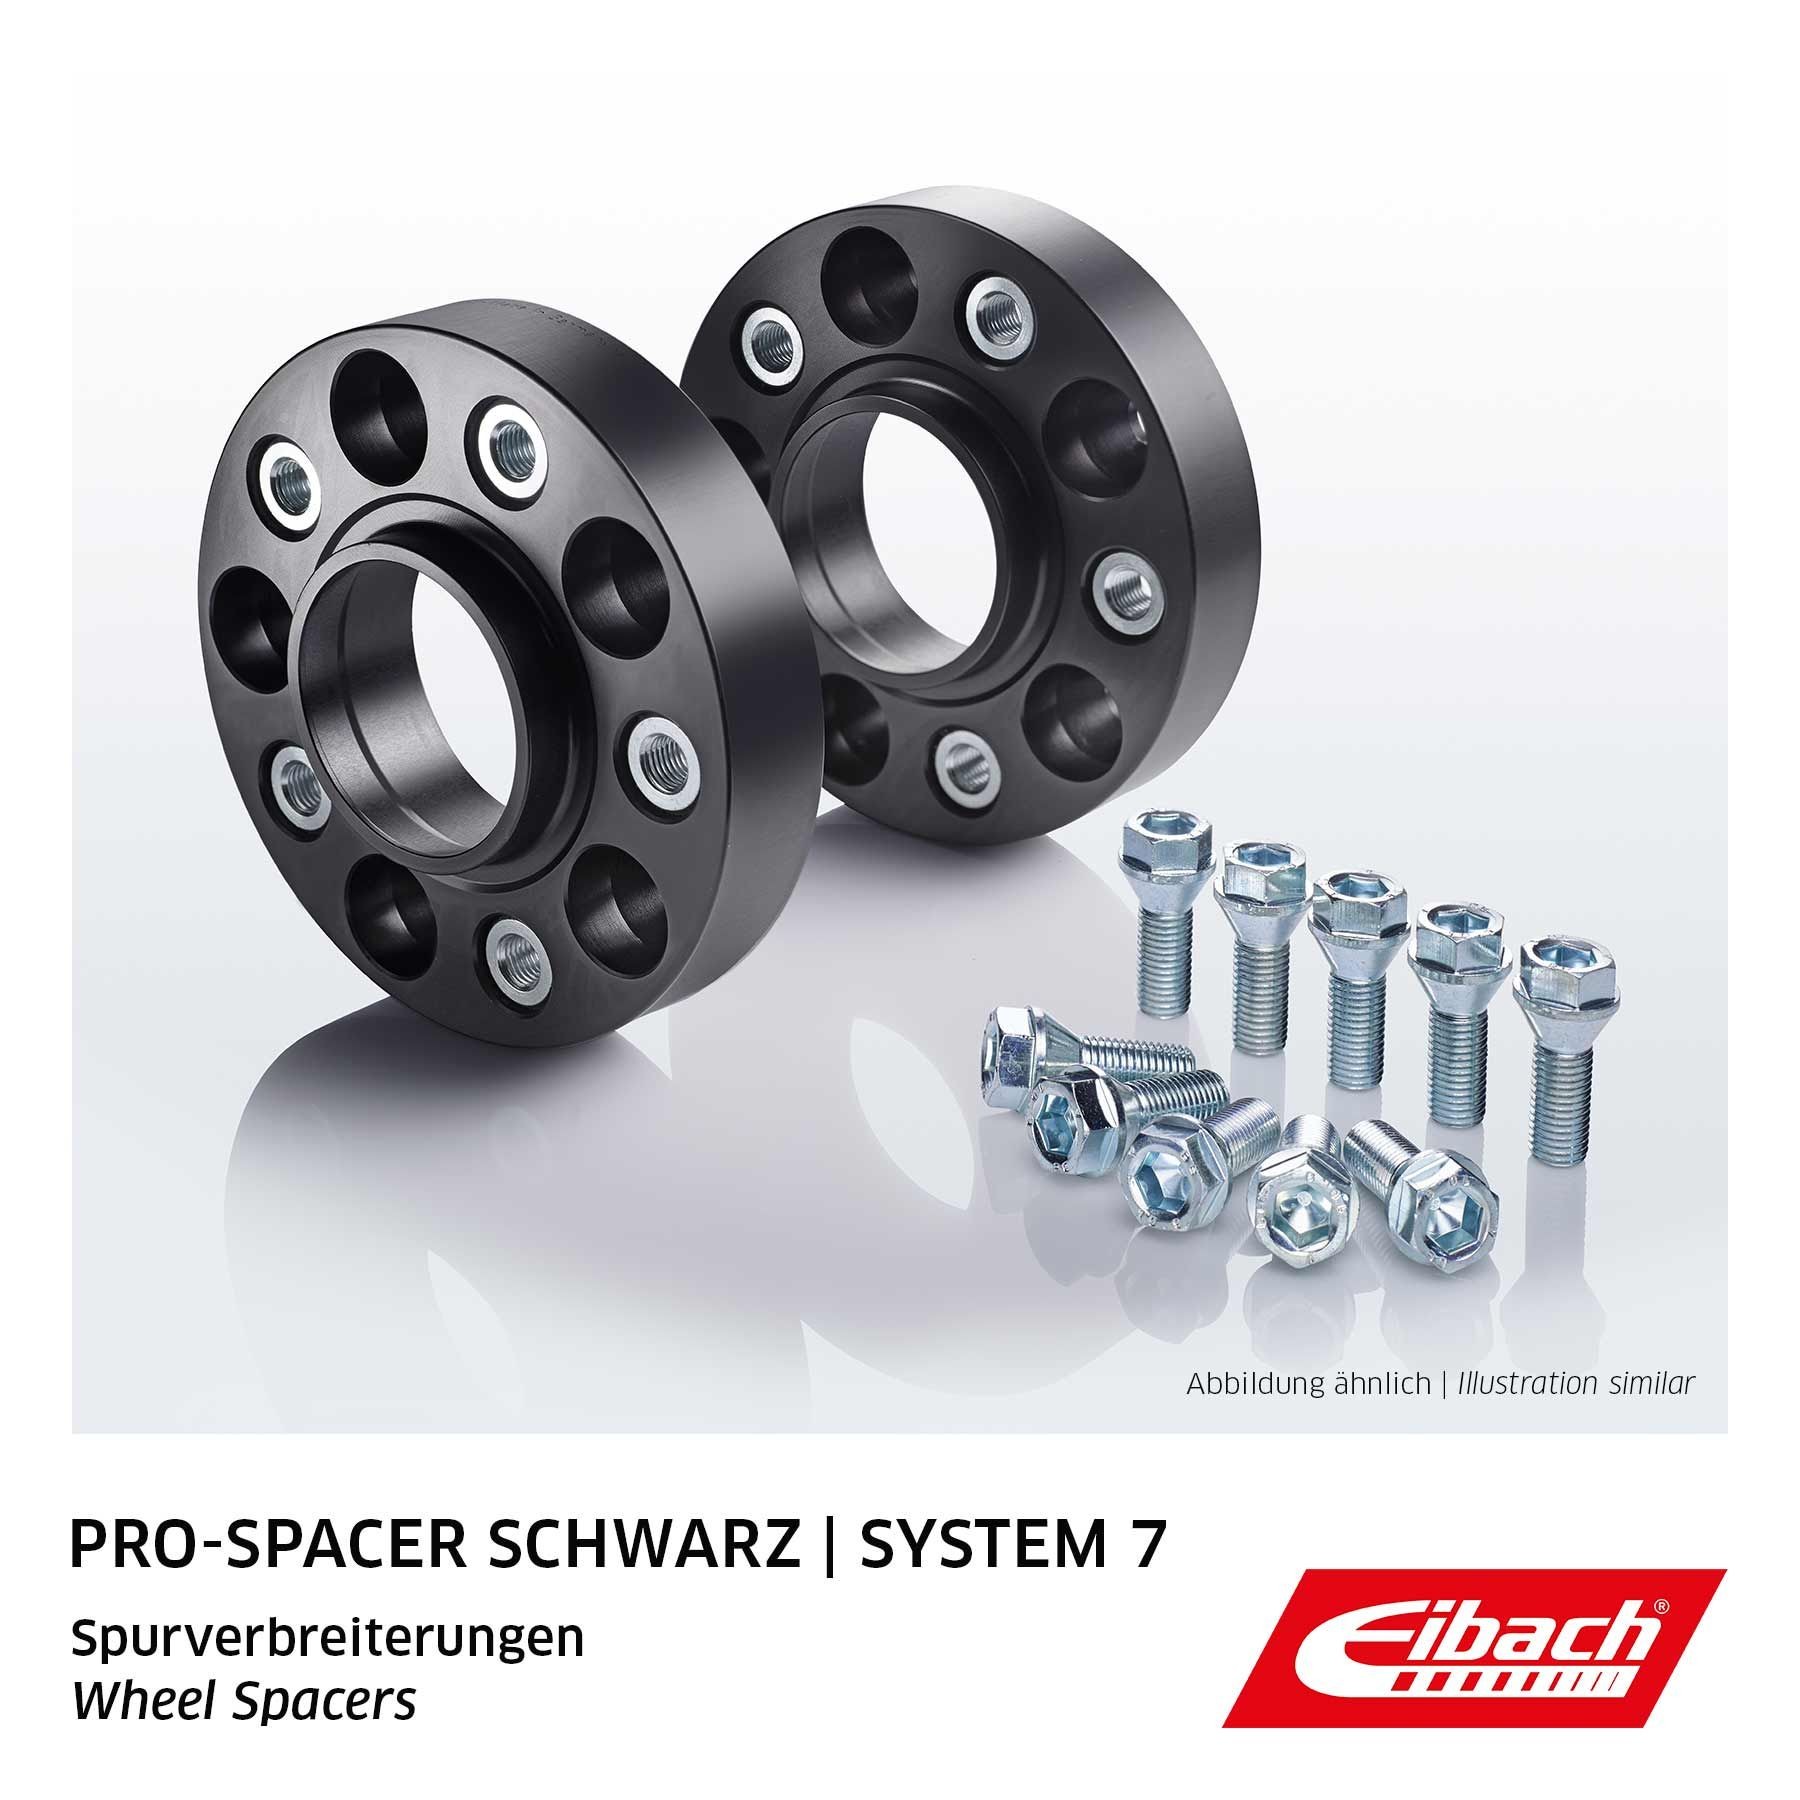 EIBACH Pro-Spacer S90-7-20-016-B Hjulspacers 5x112, 20 mm